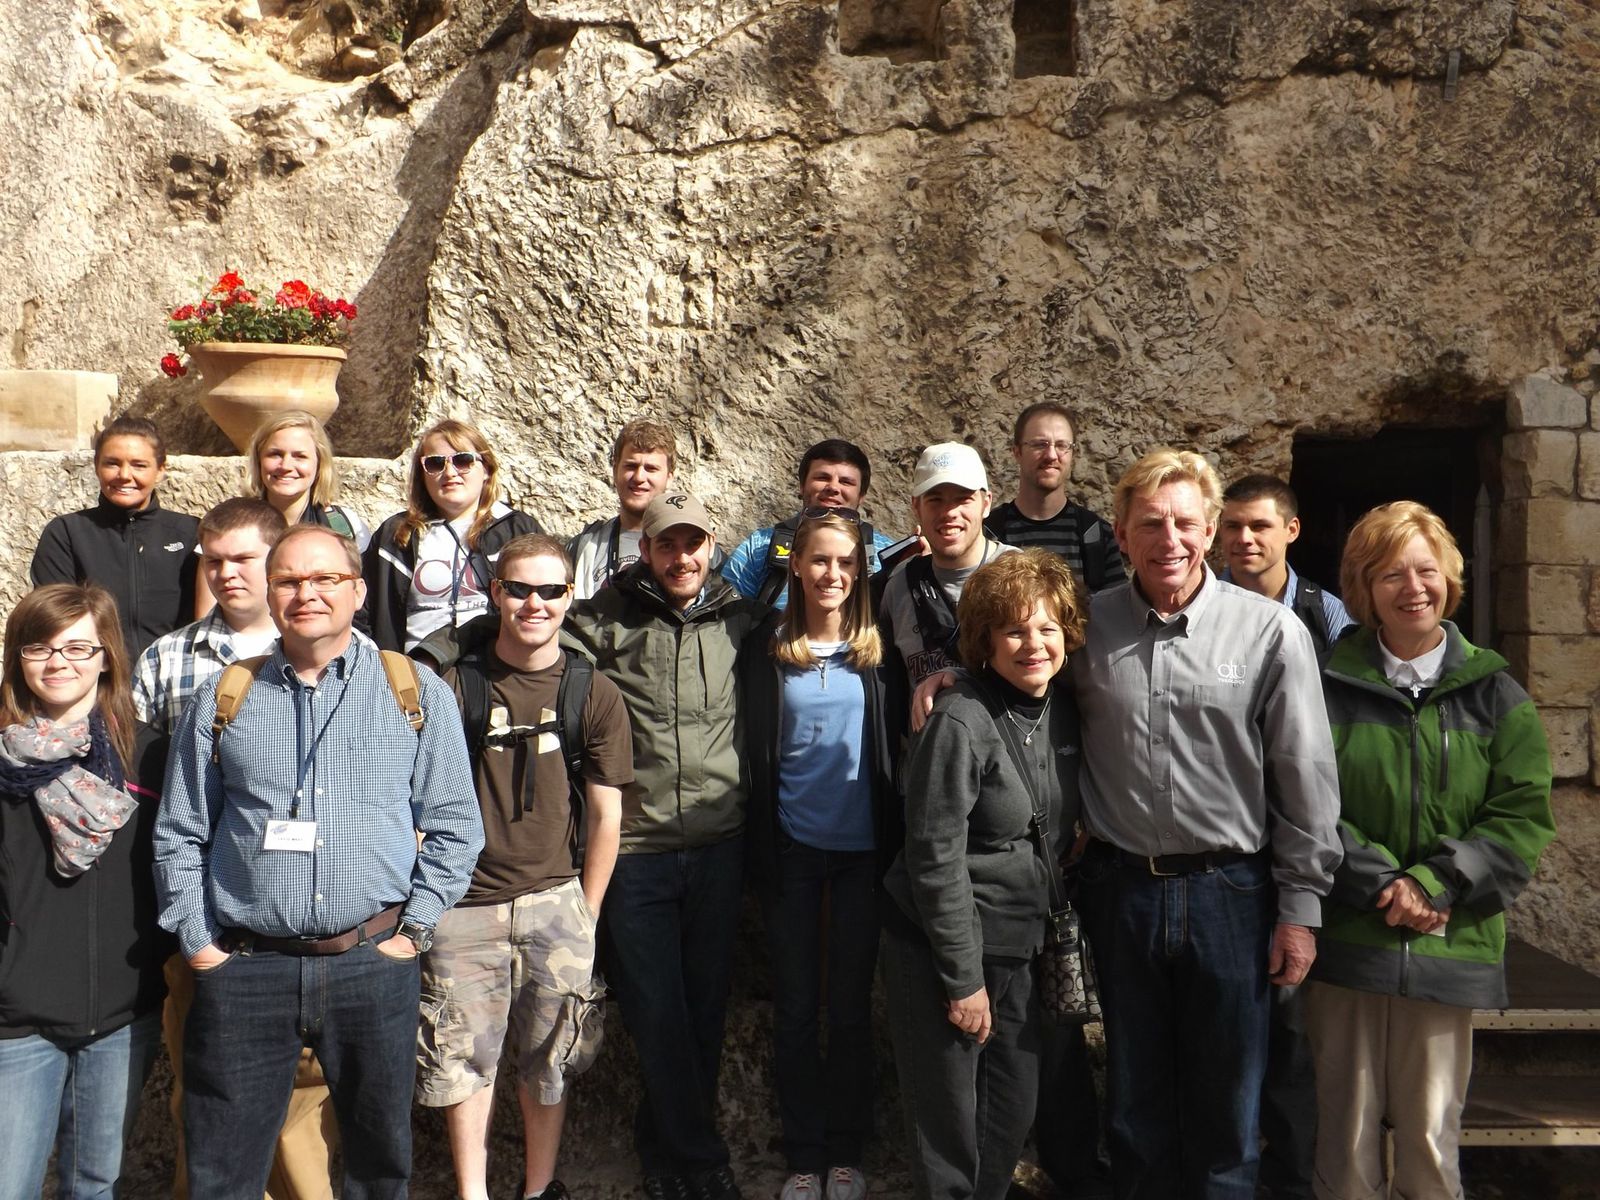 One of the most holy locations in Israel is Jesus’ tomb. From left - back row: Melissa Goble, Shelby Hicks, Marissa Rehmet, Joey Bomia, Hunter Durham-Smith and Andy Matthies. Middle row: Zach Gray, Kevin Rothacker, Mary Kate Young, Aron Neal and Dalton Hicks. Front row: Brittney Casey, David Wray, Adam Coleman, Sheri Taylor, Dr. Ted Taylor and Pam Hurtgen.